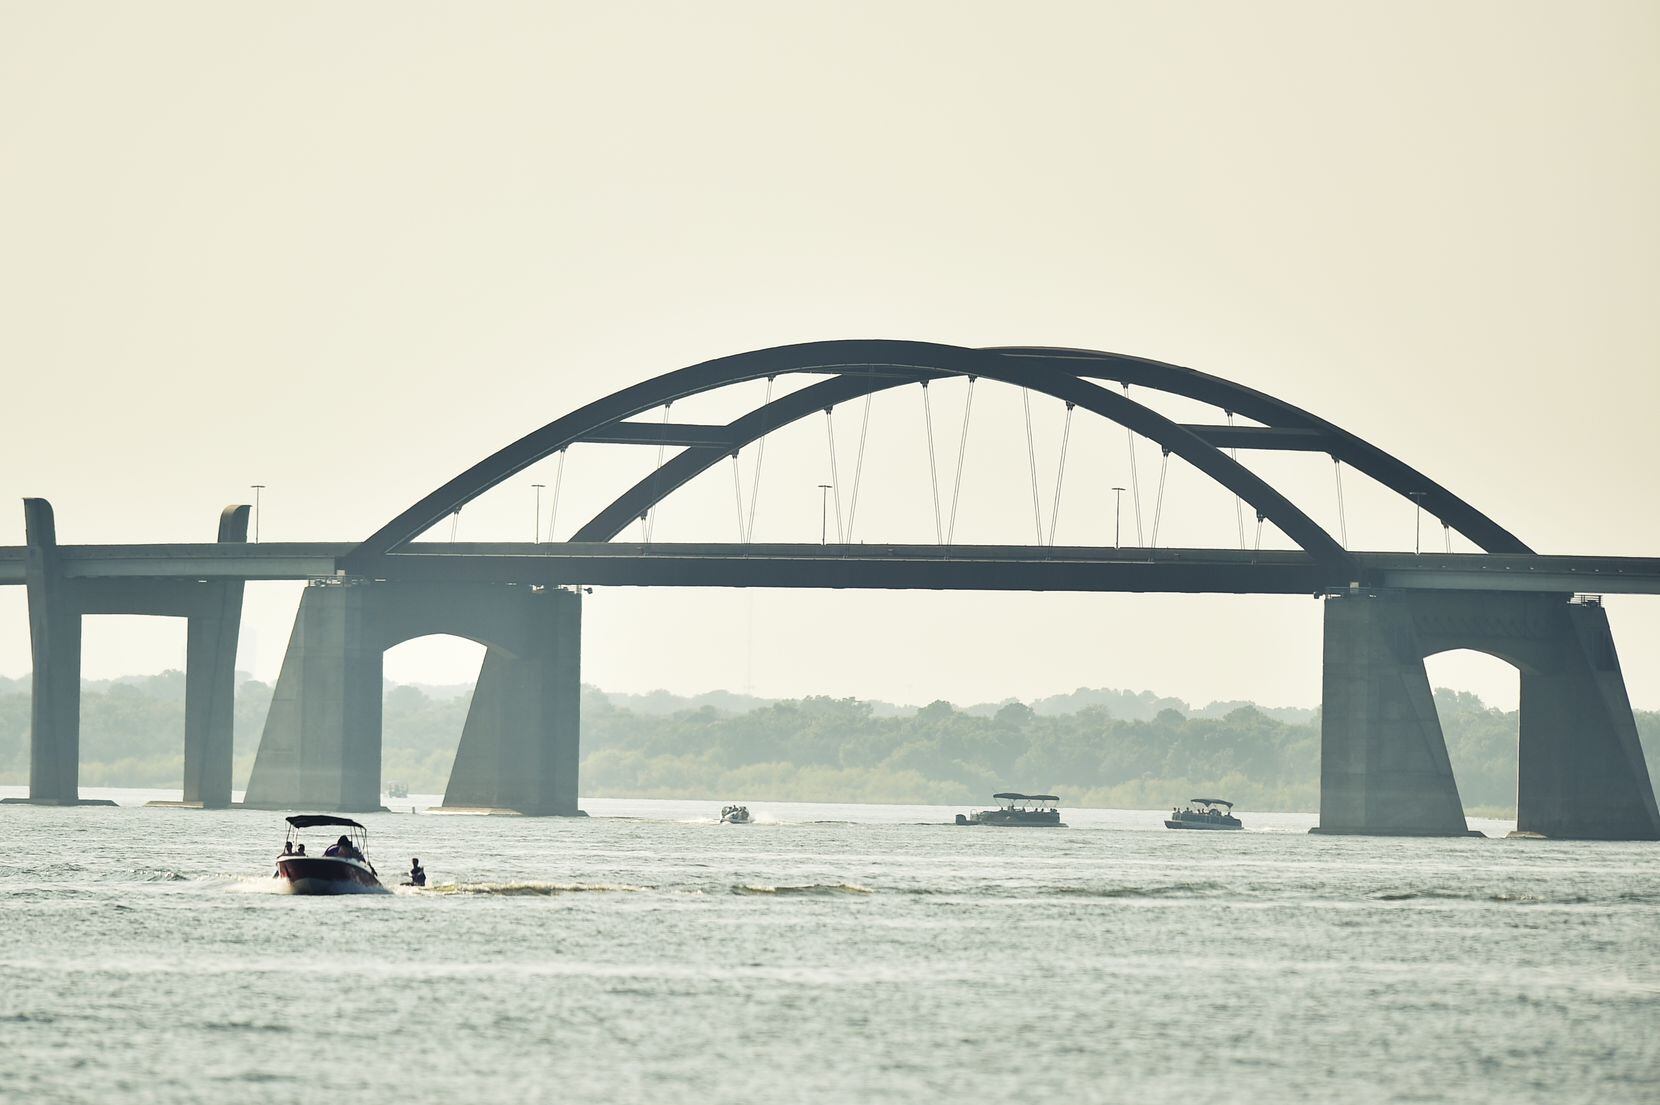 Boaters enjoy the warm sunny weather on Lewisville Lake near the Lewisville Lake toll bridge...